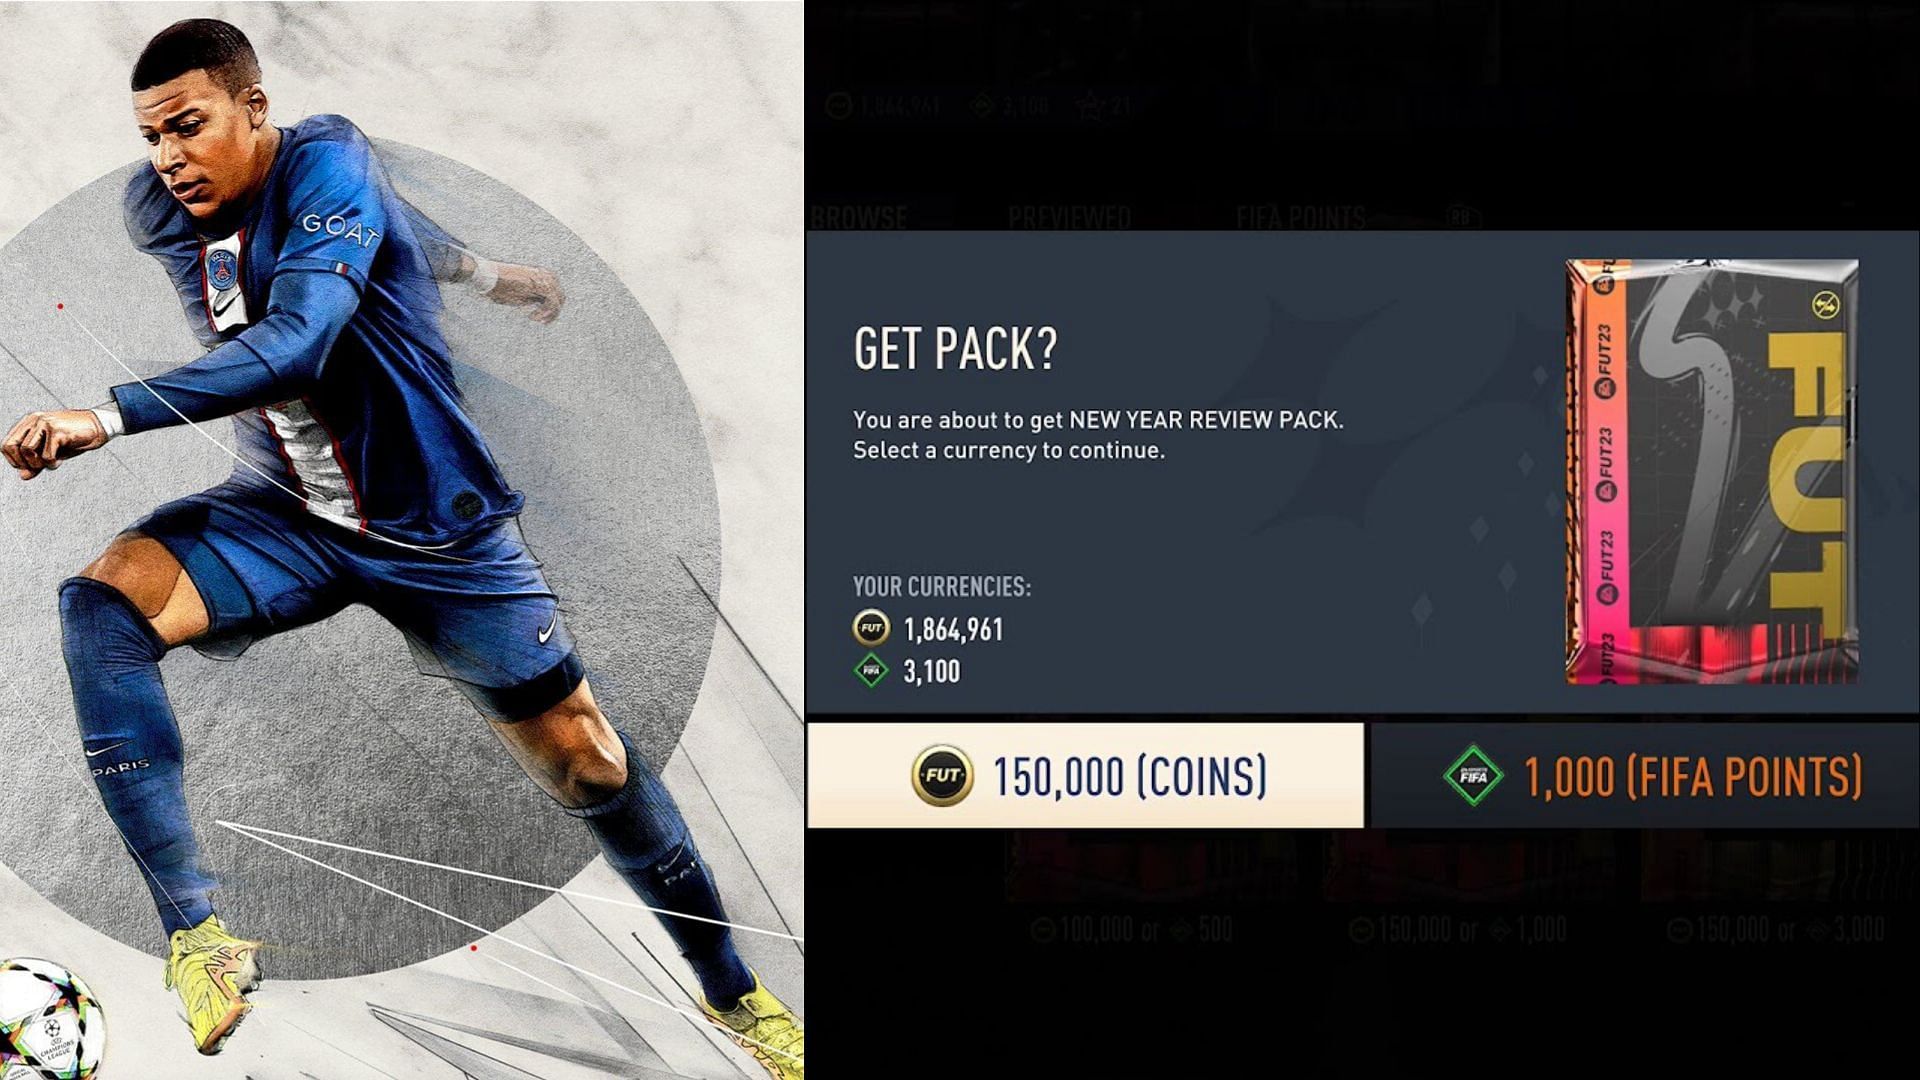 FIFA 23 players will have to spend plenty of coins if they need to open the Premium New Year Review Pack (Images via EA Sports)